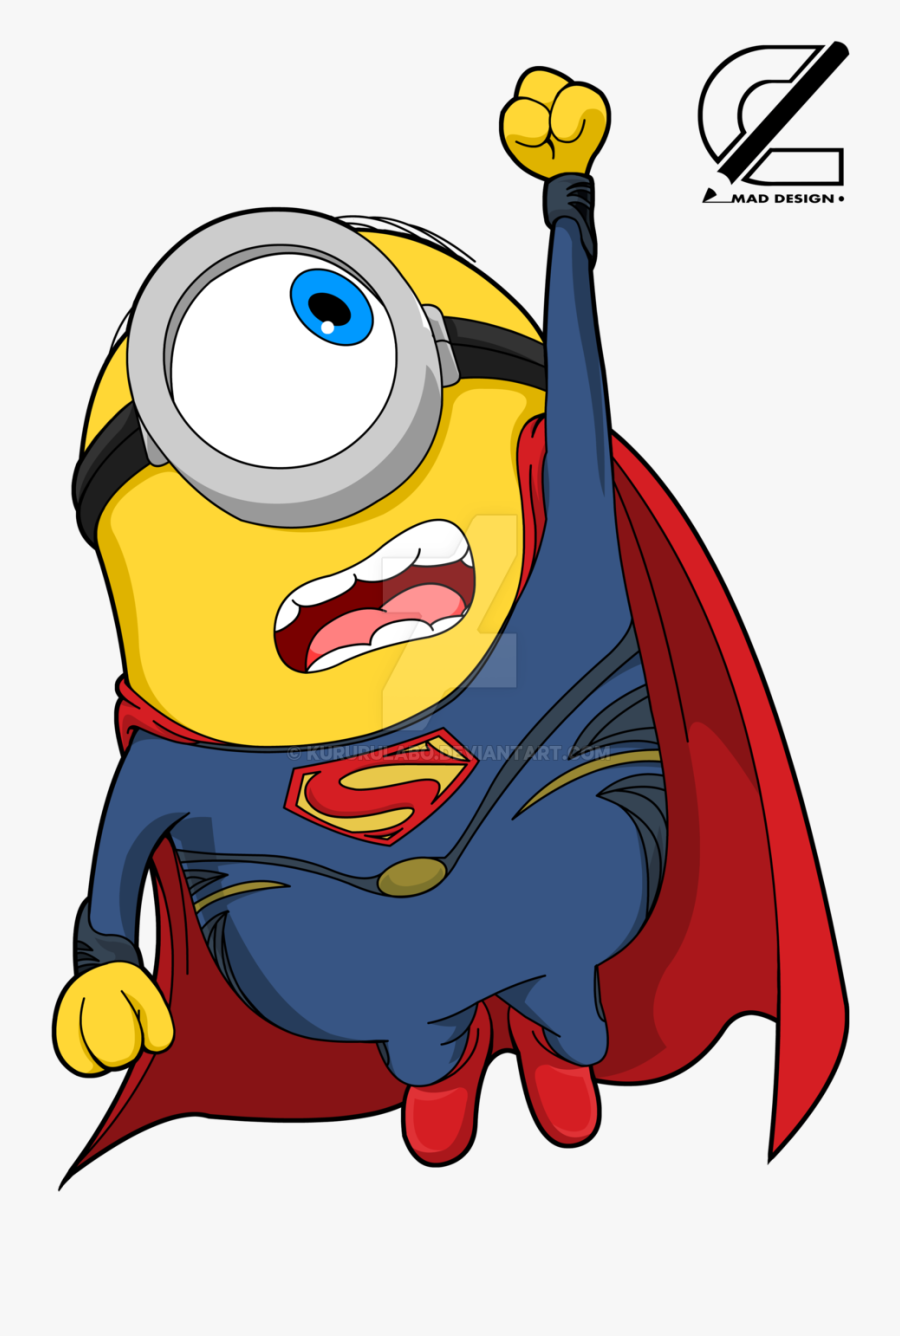 Free Download Superman Minion Png Clipart Superman - Minion Superhero Clipart, Transparent Clipart